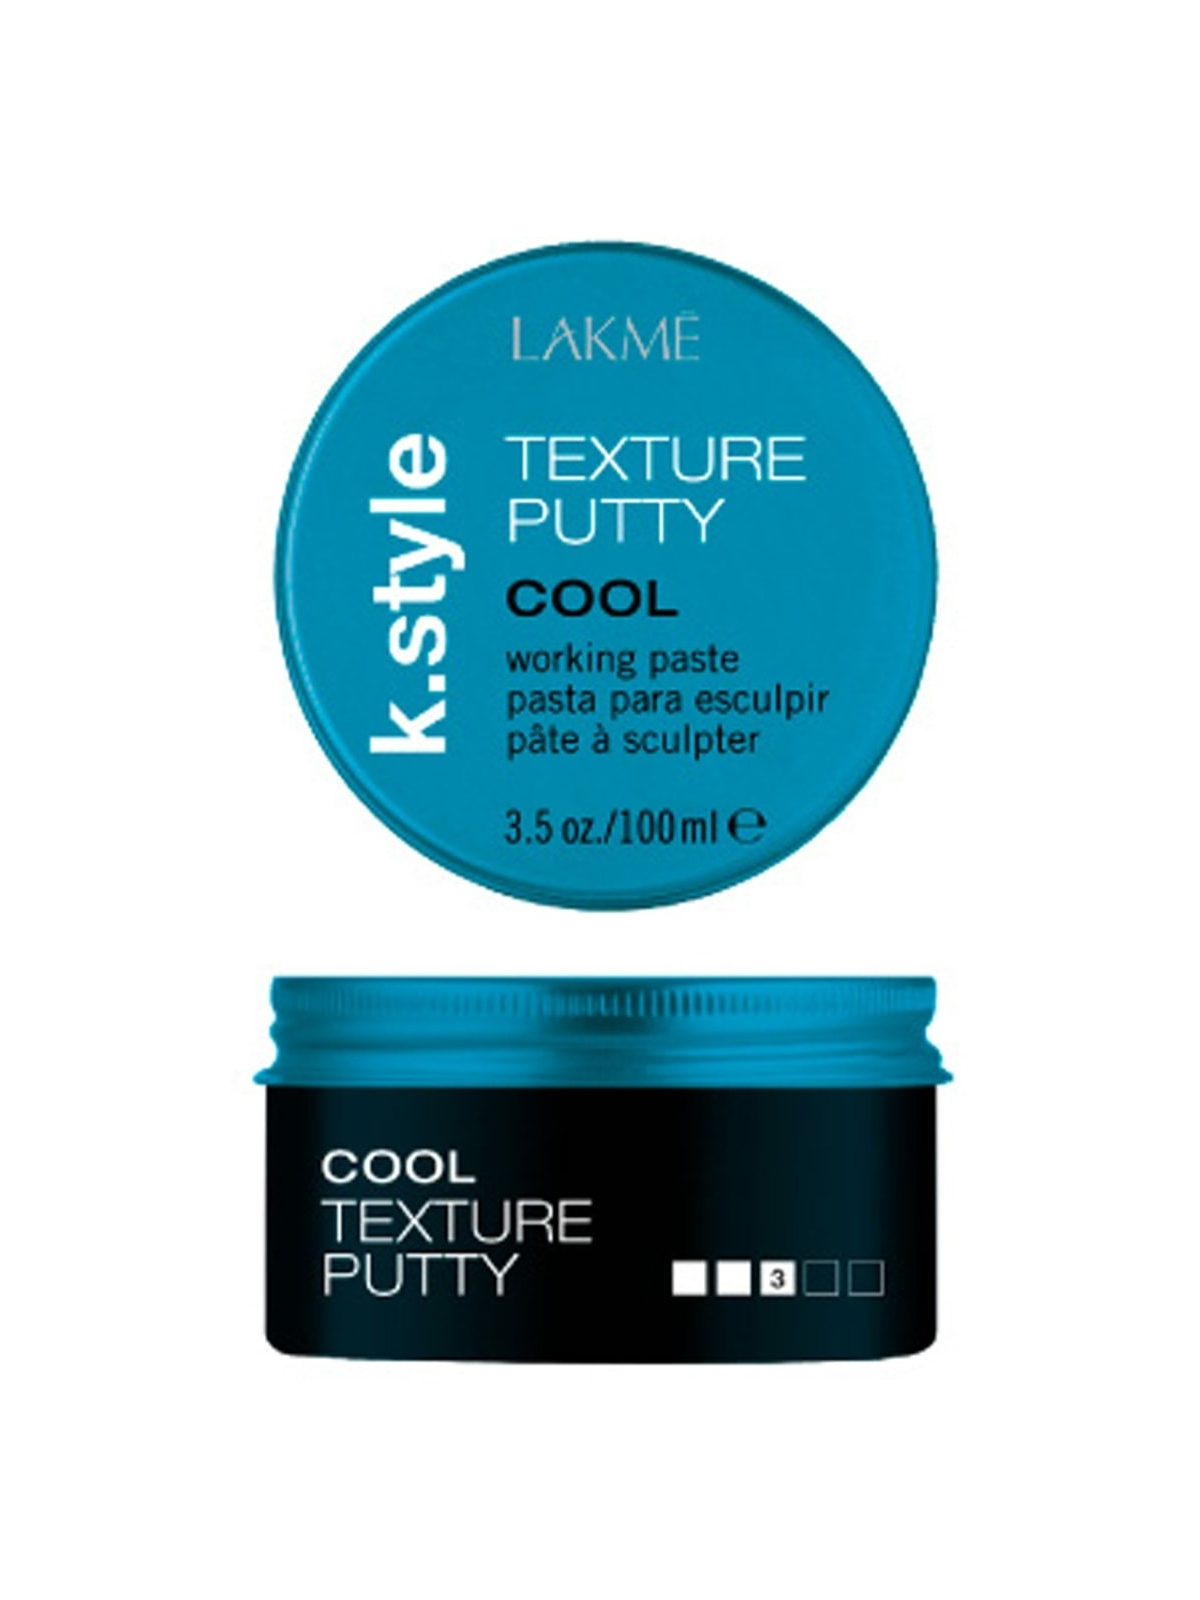 TEXTURE PUTTY WORKING PASTE K.STYLE LAKME